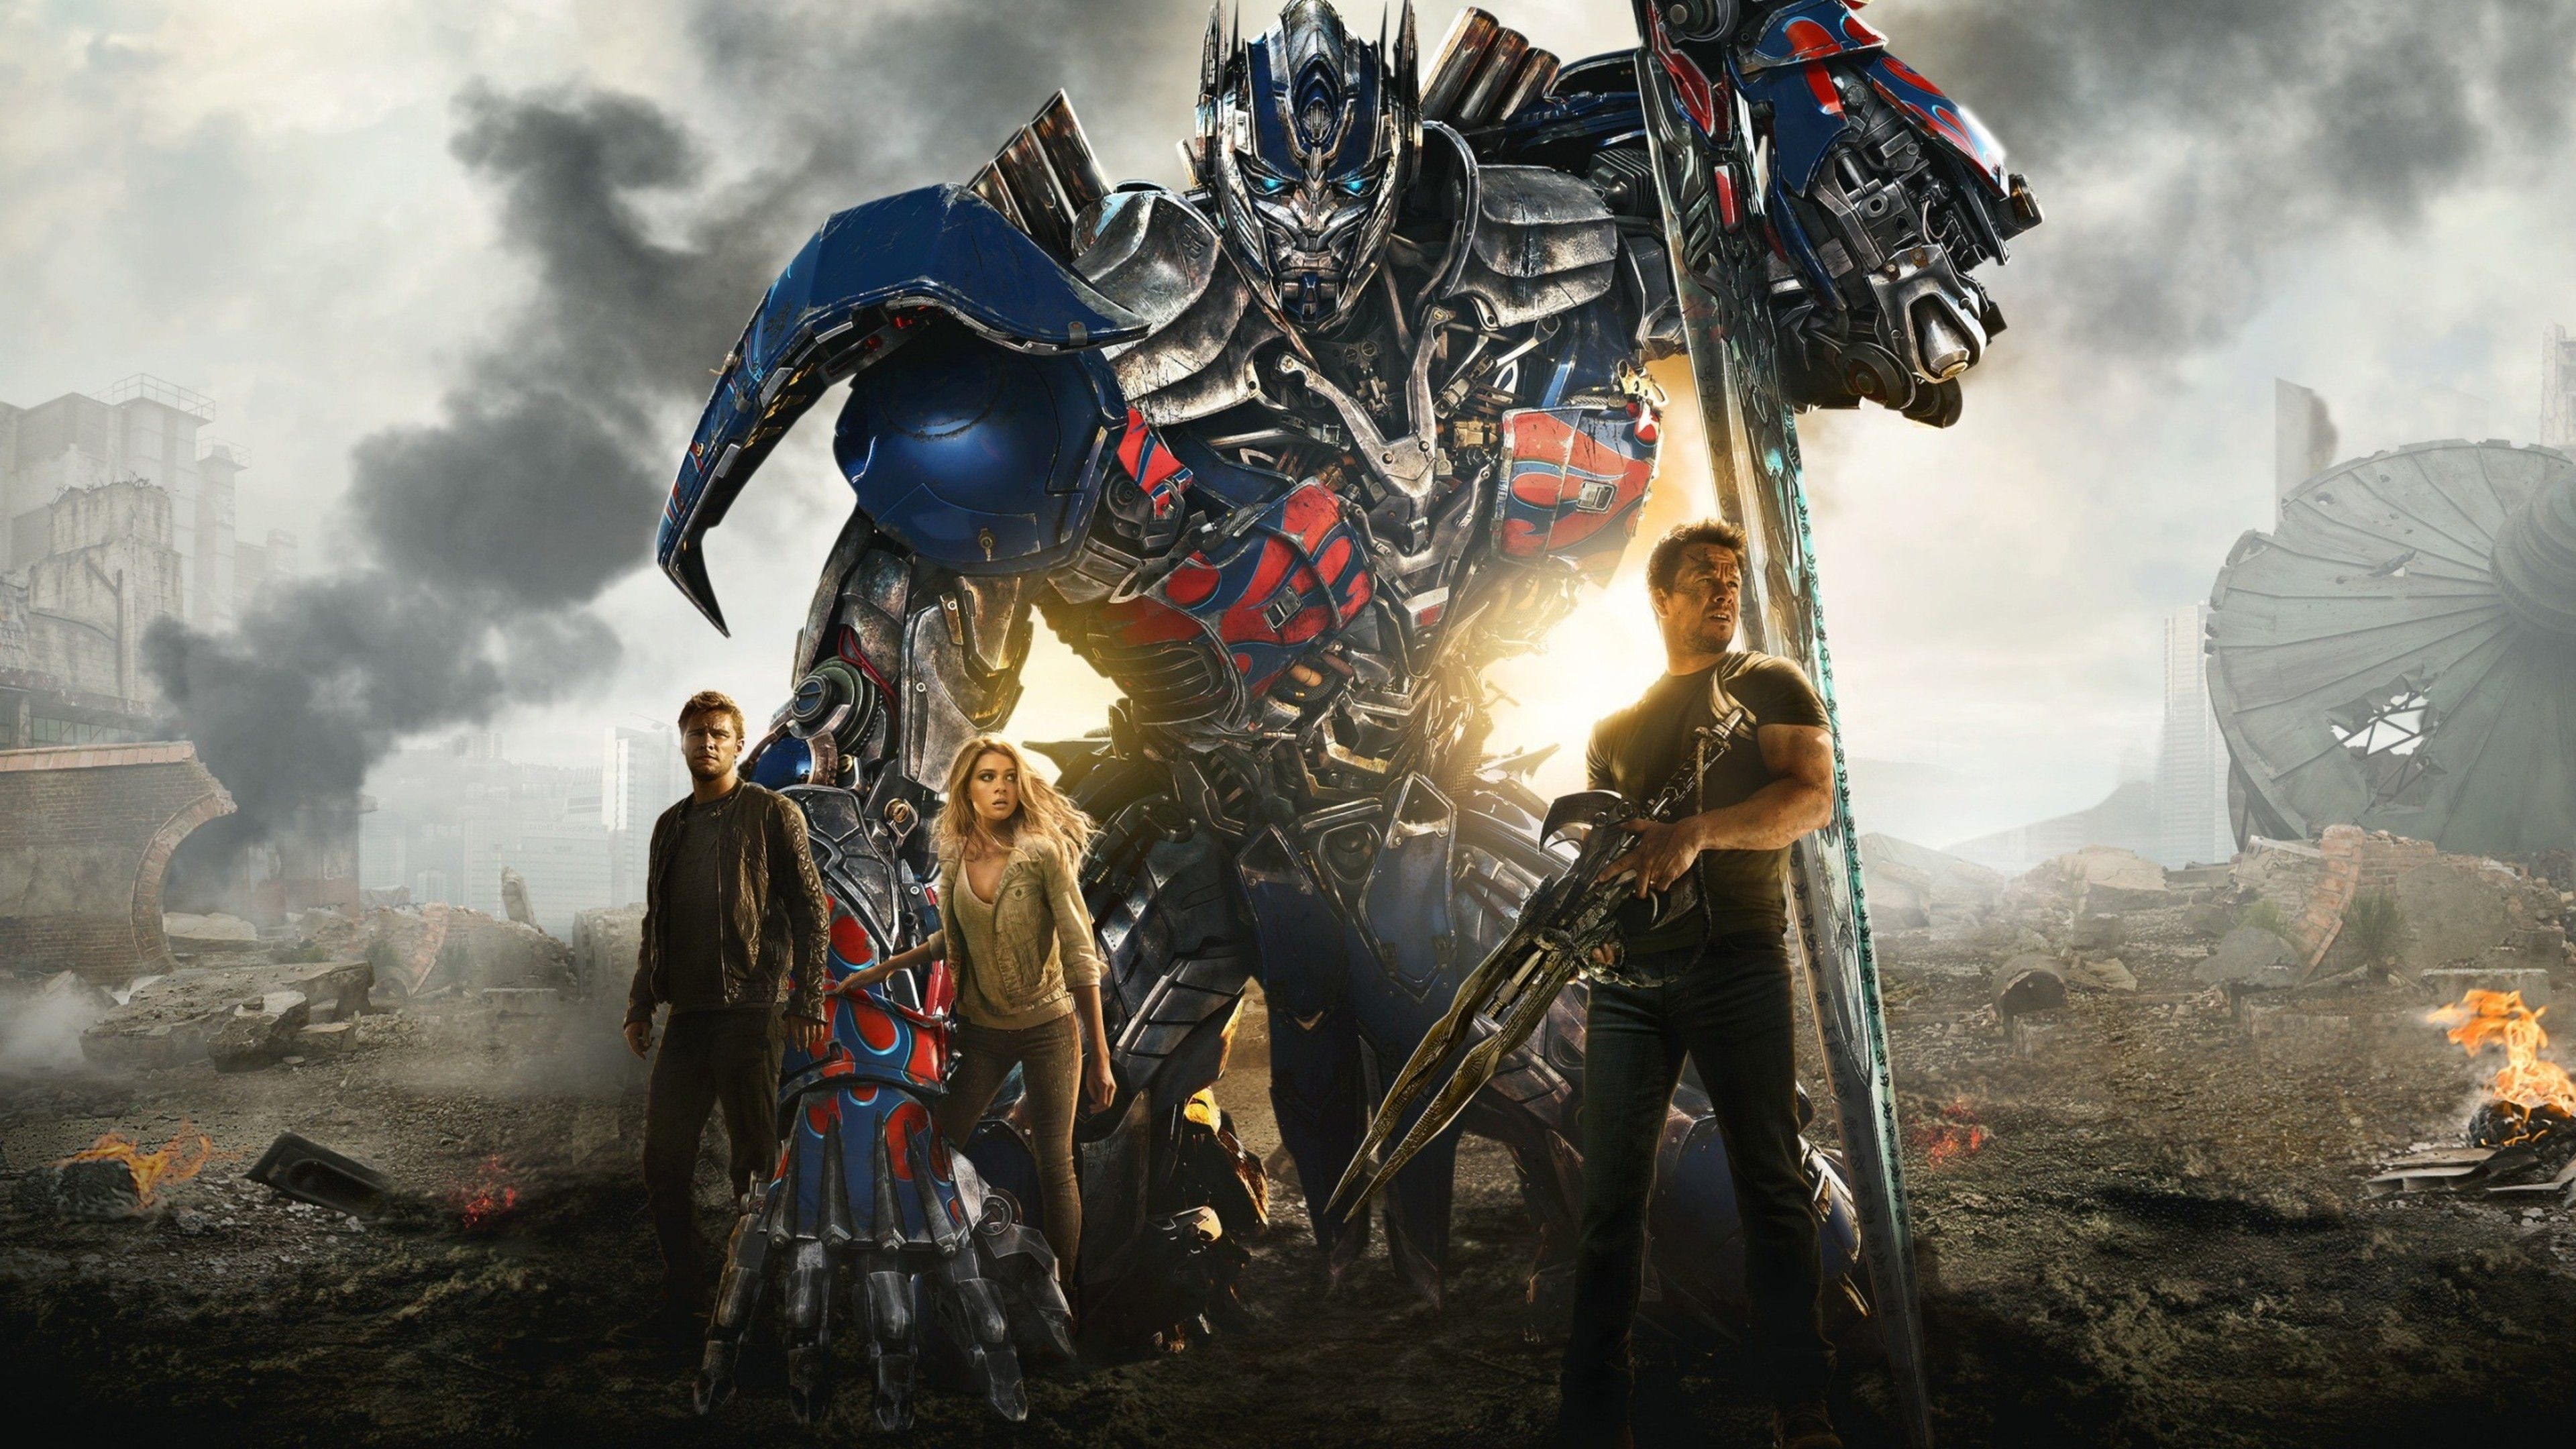 Transformers 4 wallpapers, Top choices, HD quality, Iconic characters, 3840x2160 4K Desktop